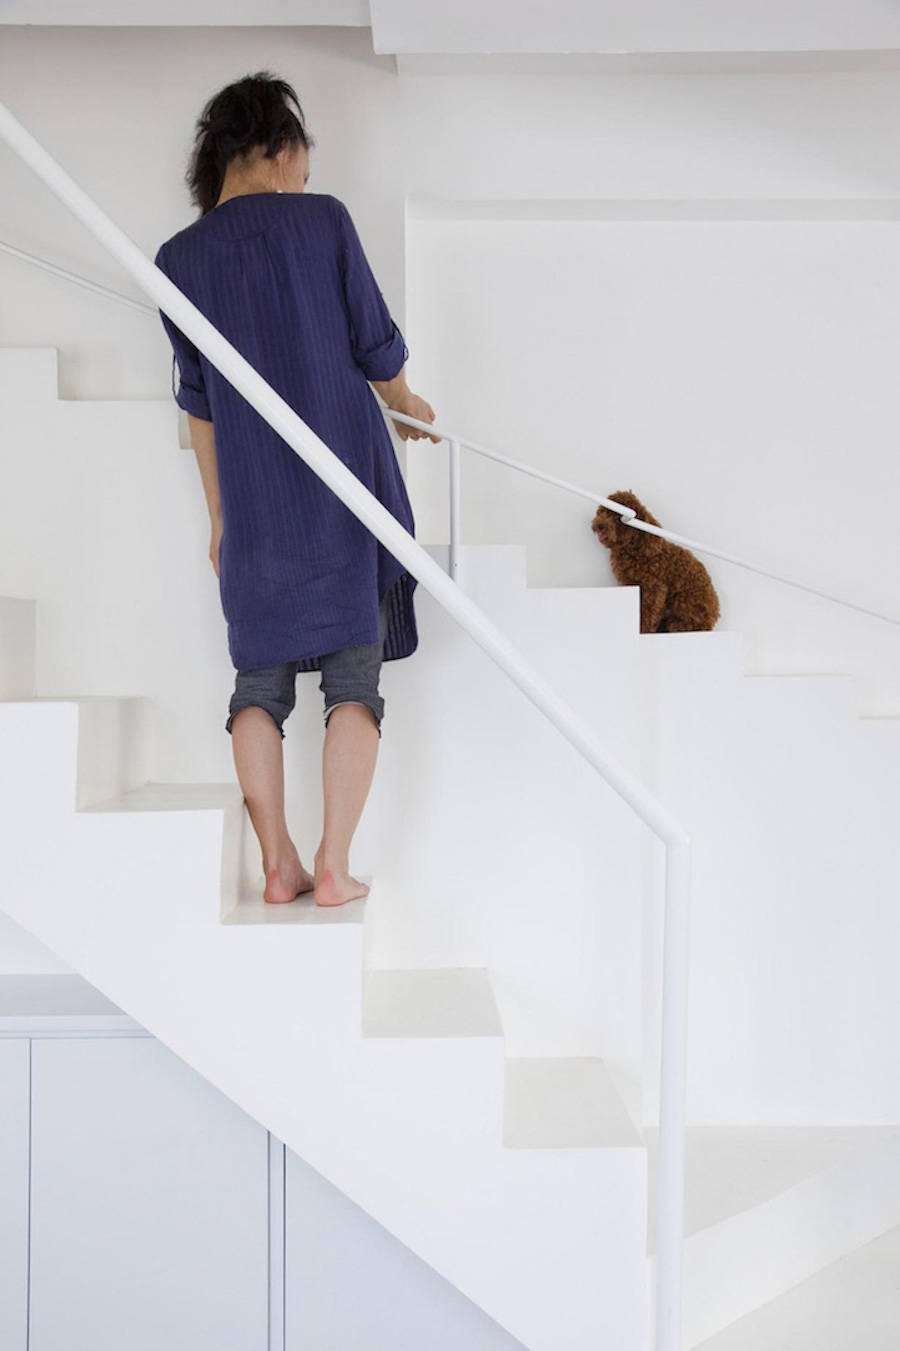 Staircase Designed for Small Pets3